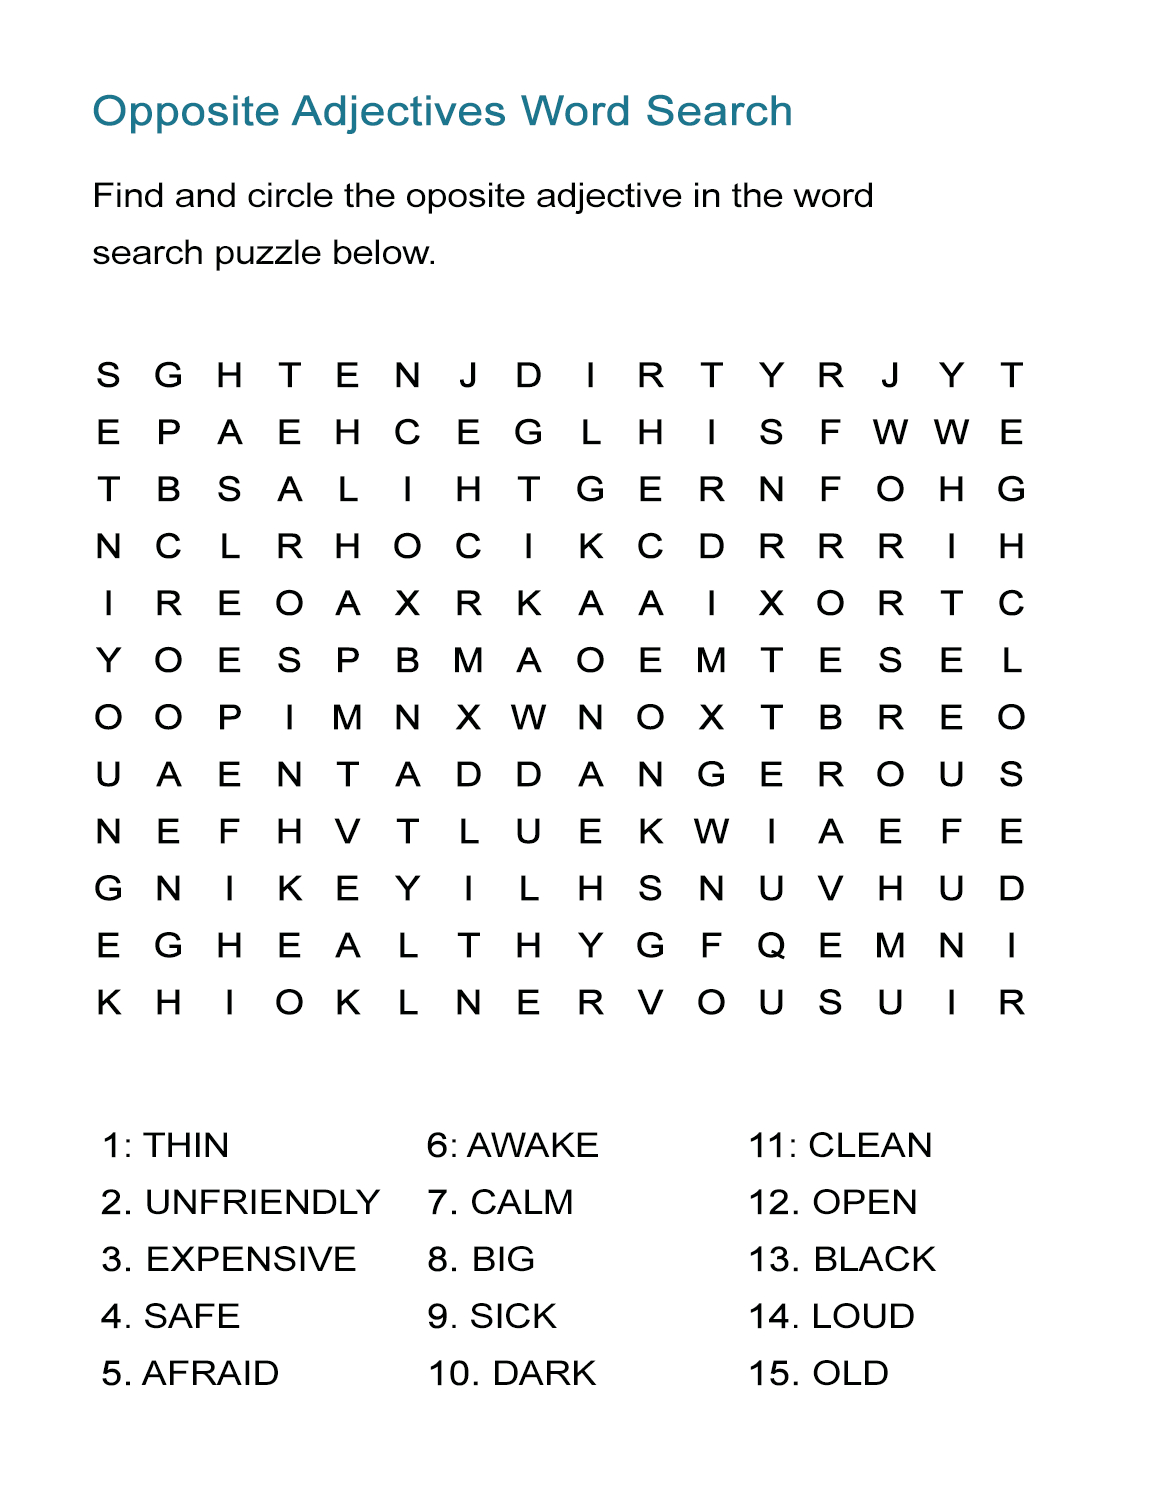 Opposite Adjectives Word Search Puzzle - All Esl